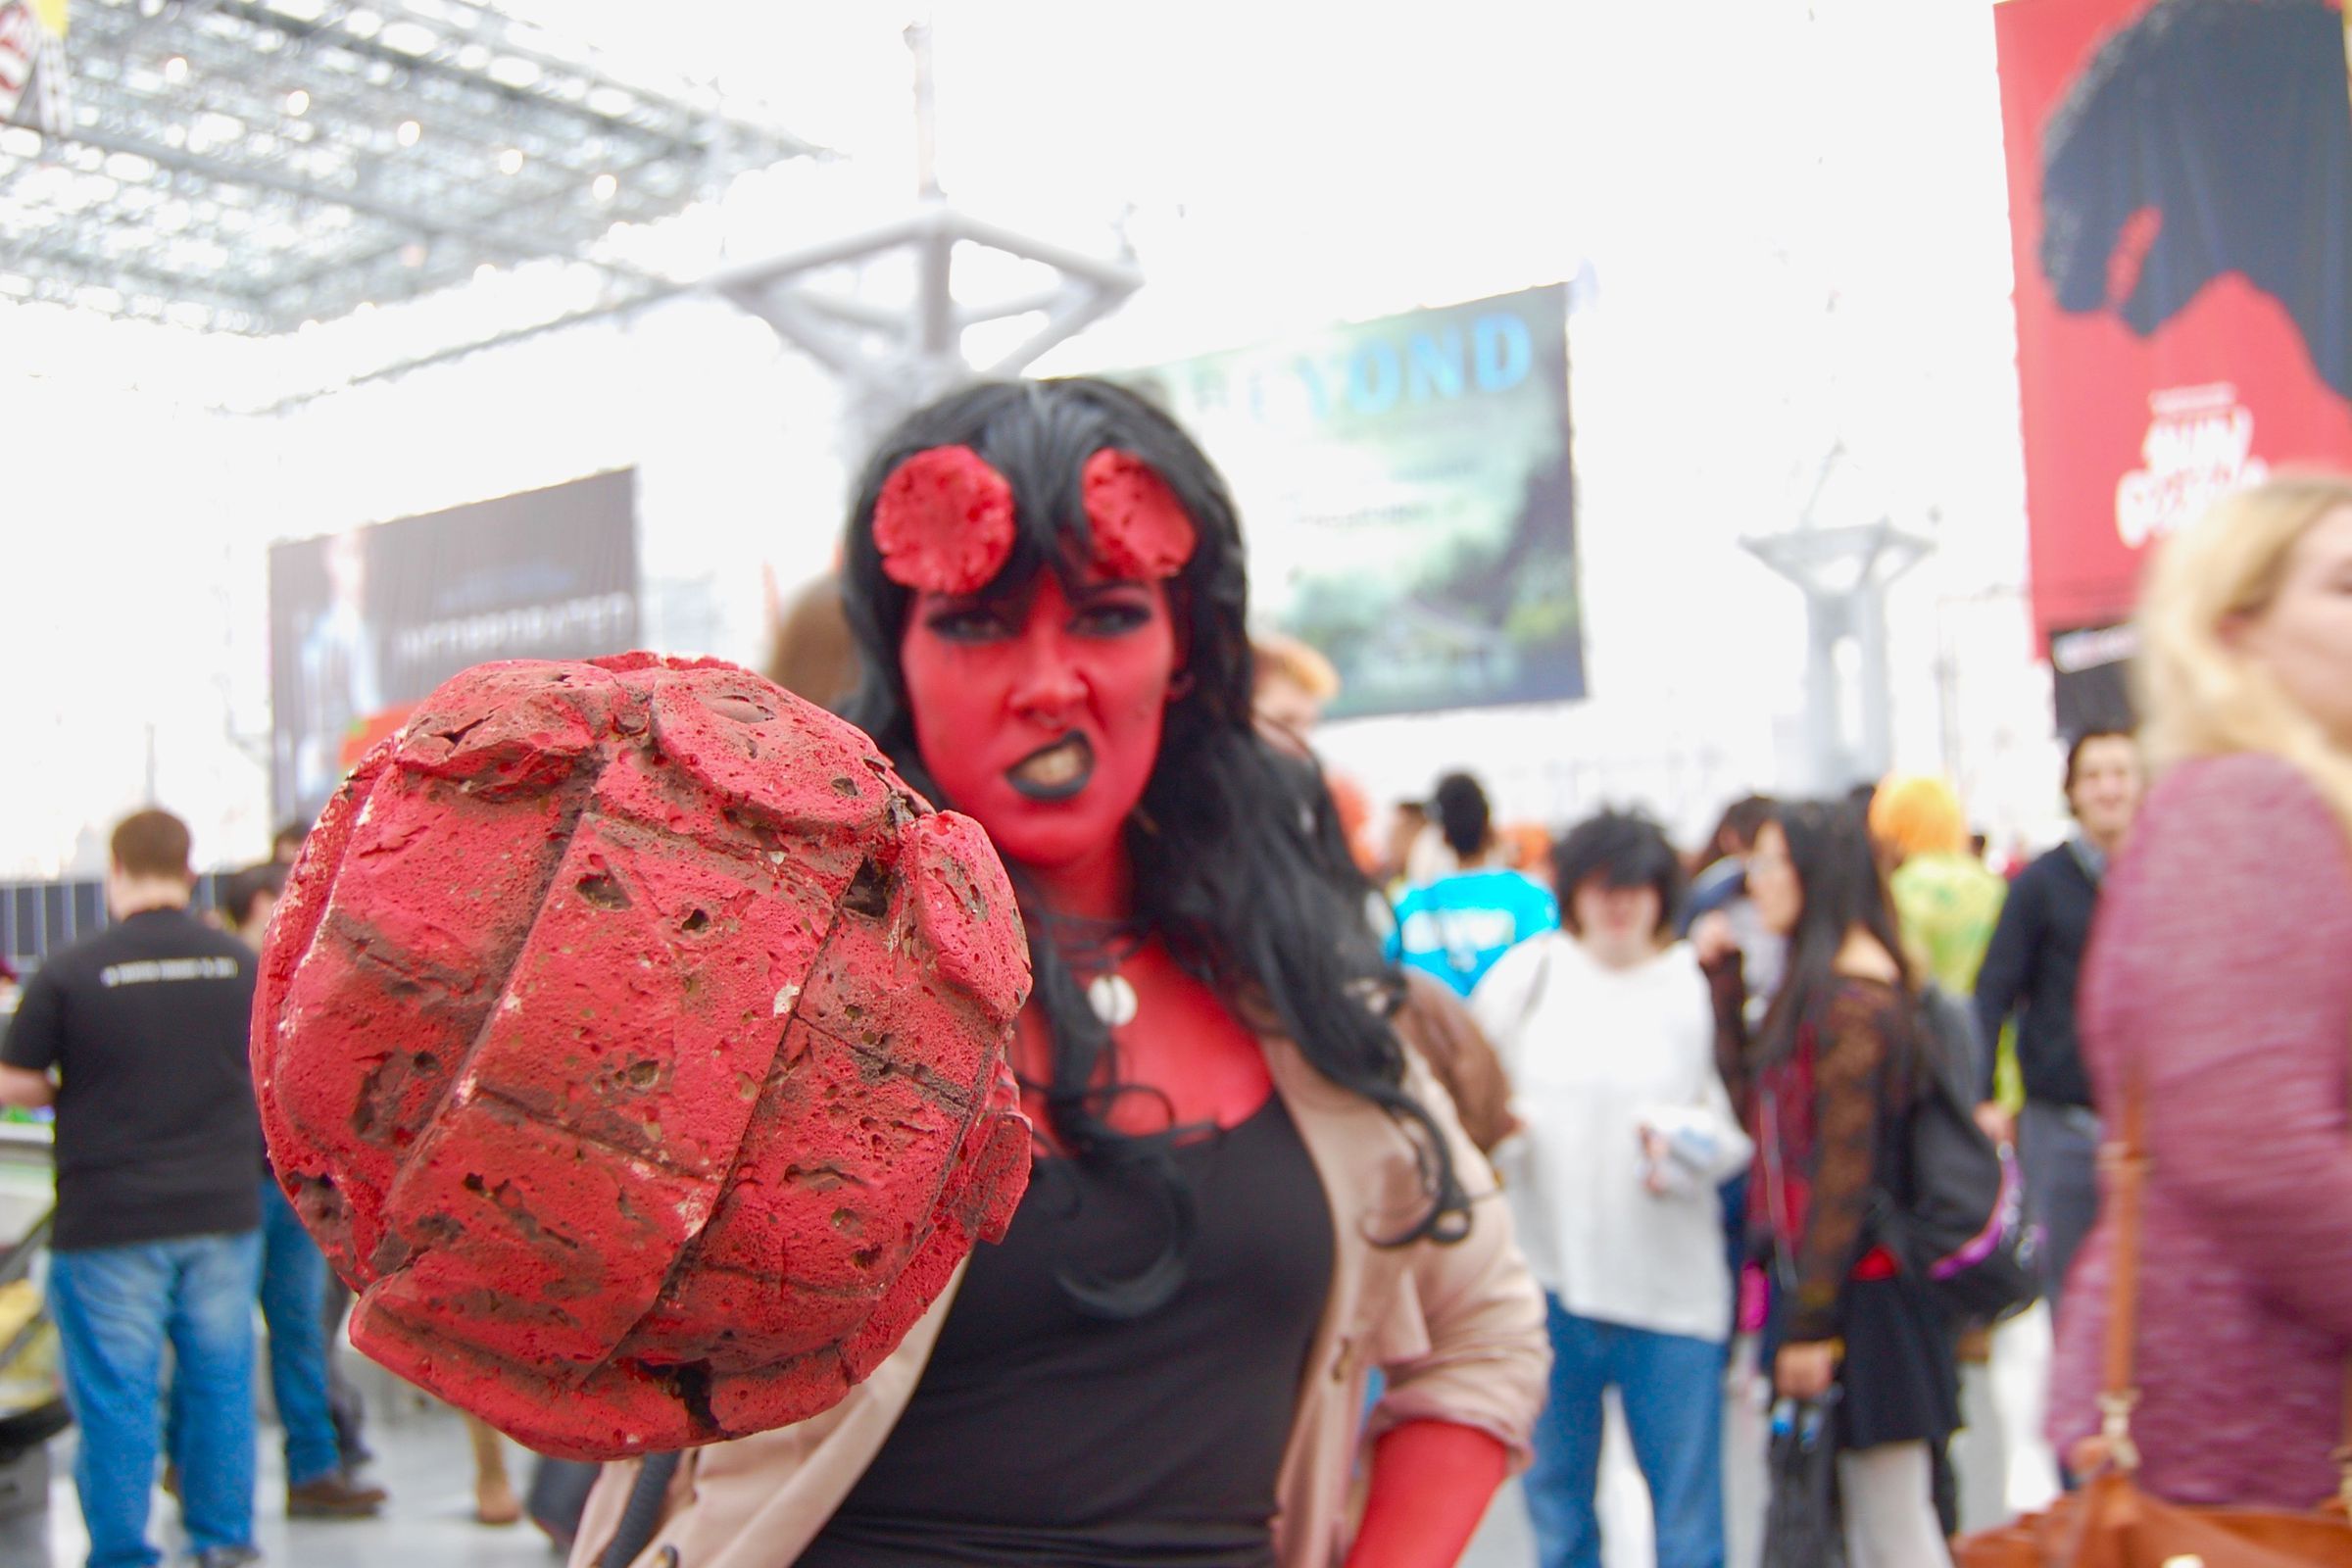 Meet the cosplayers of New York Comic Con